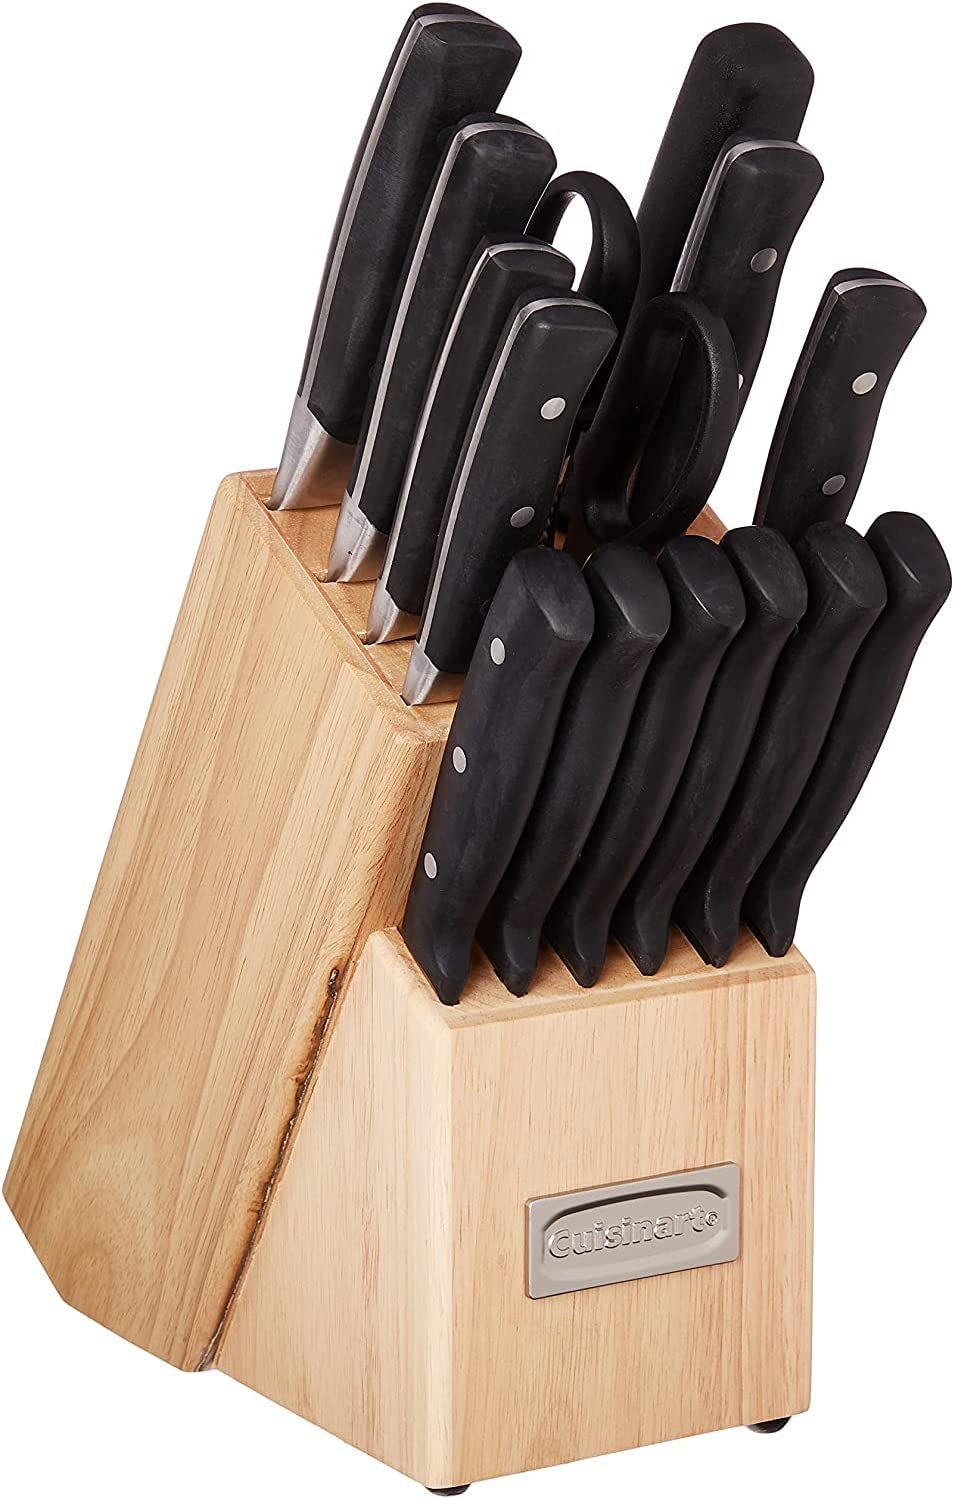 15 Piece Kitchen Knife Set with Block by Cuisinart, Cutlery Set, Triple Rivet Collection, C77TR-15P